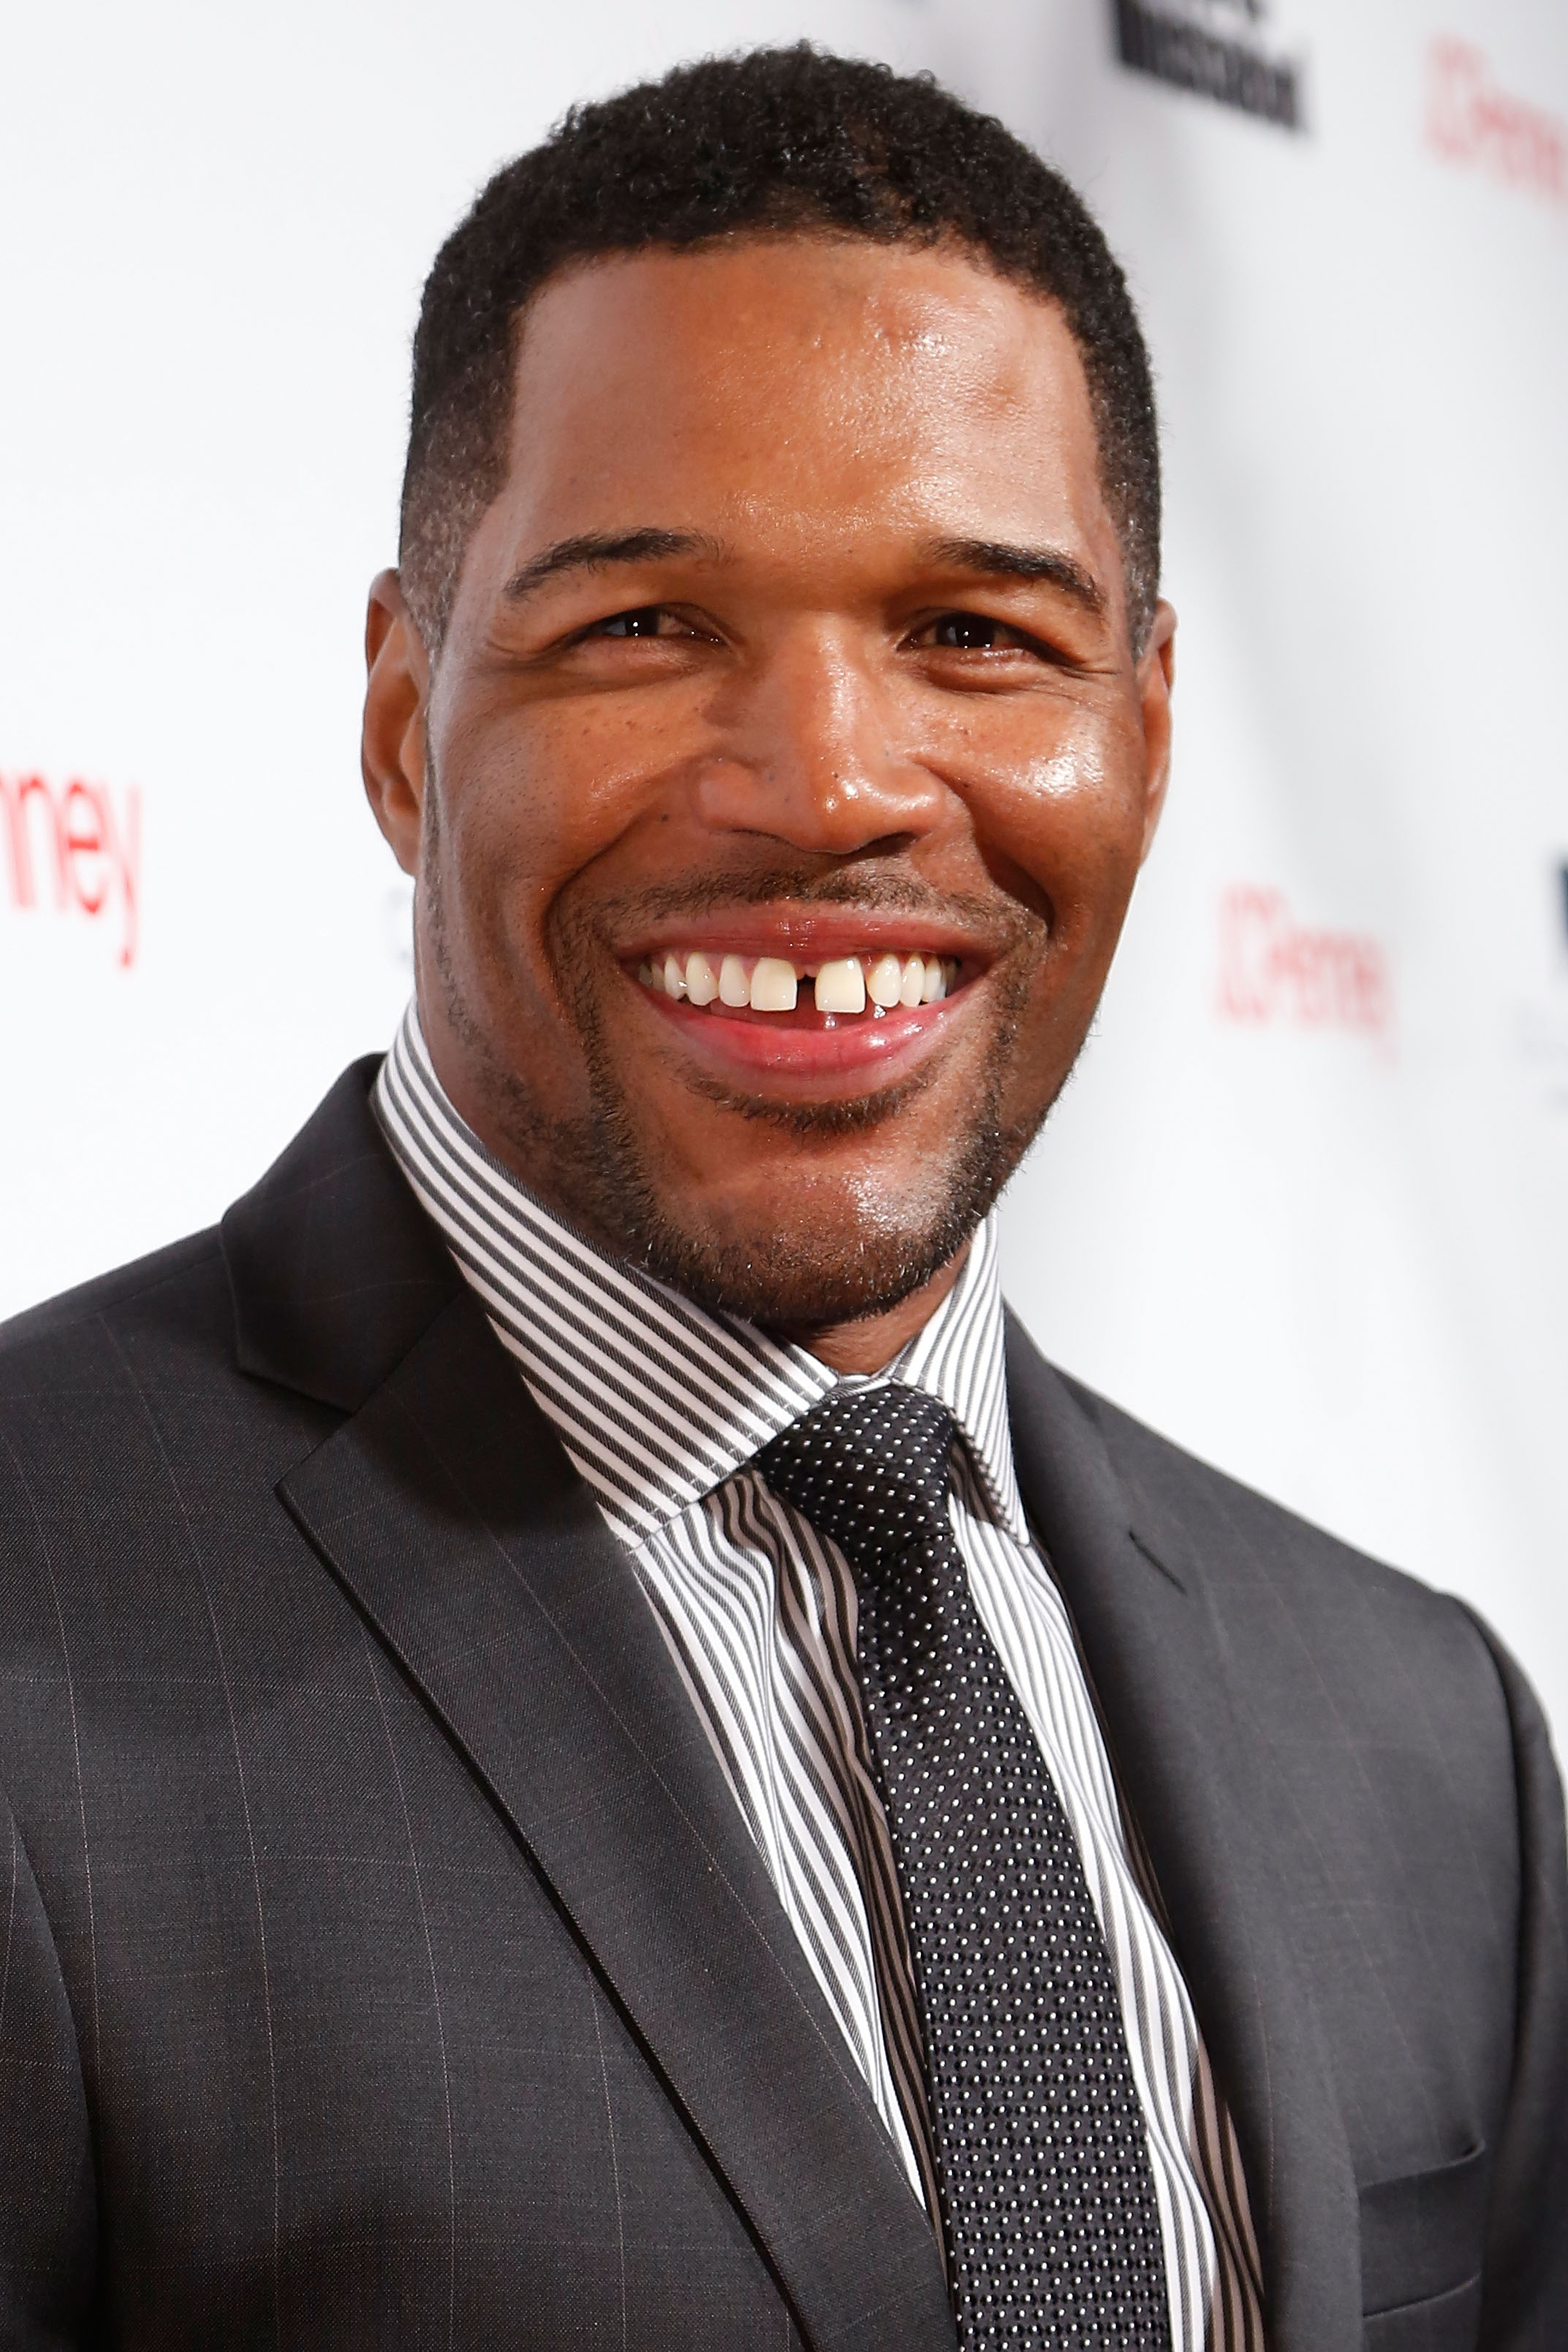 Michael Strahan attends the Sports Illustrated's Fashionable 50 NYC Event at Vandal on April 12, 2016 in New York City.